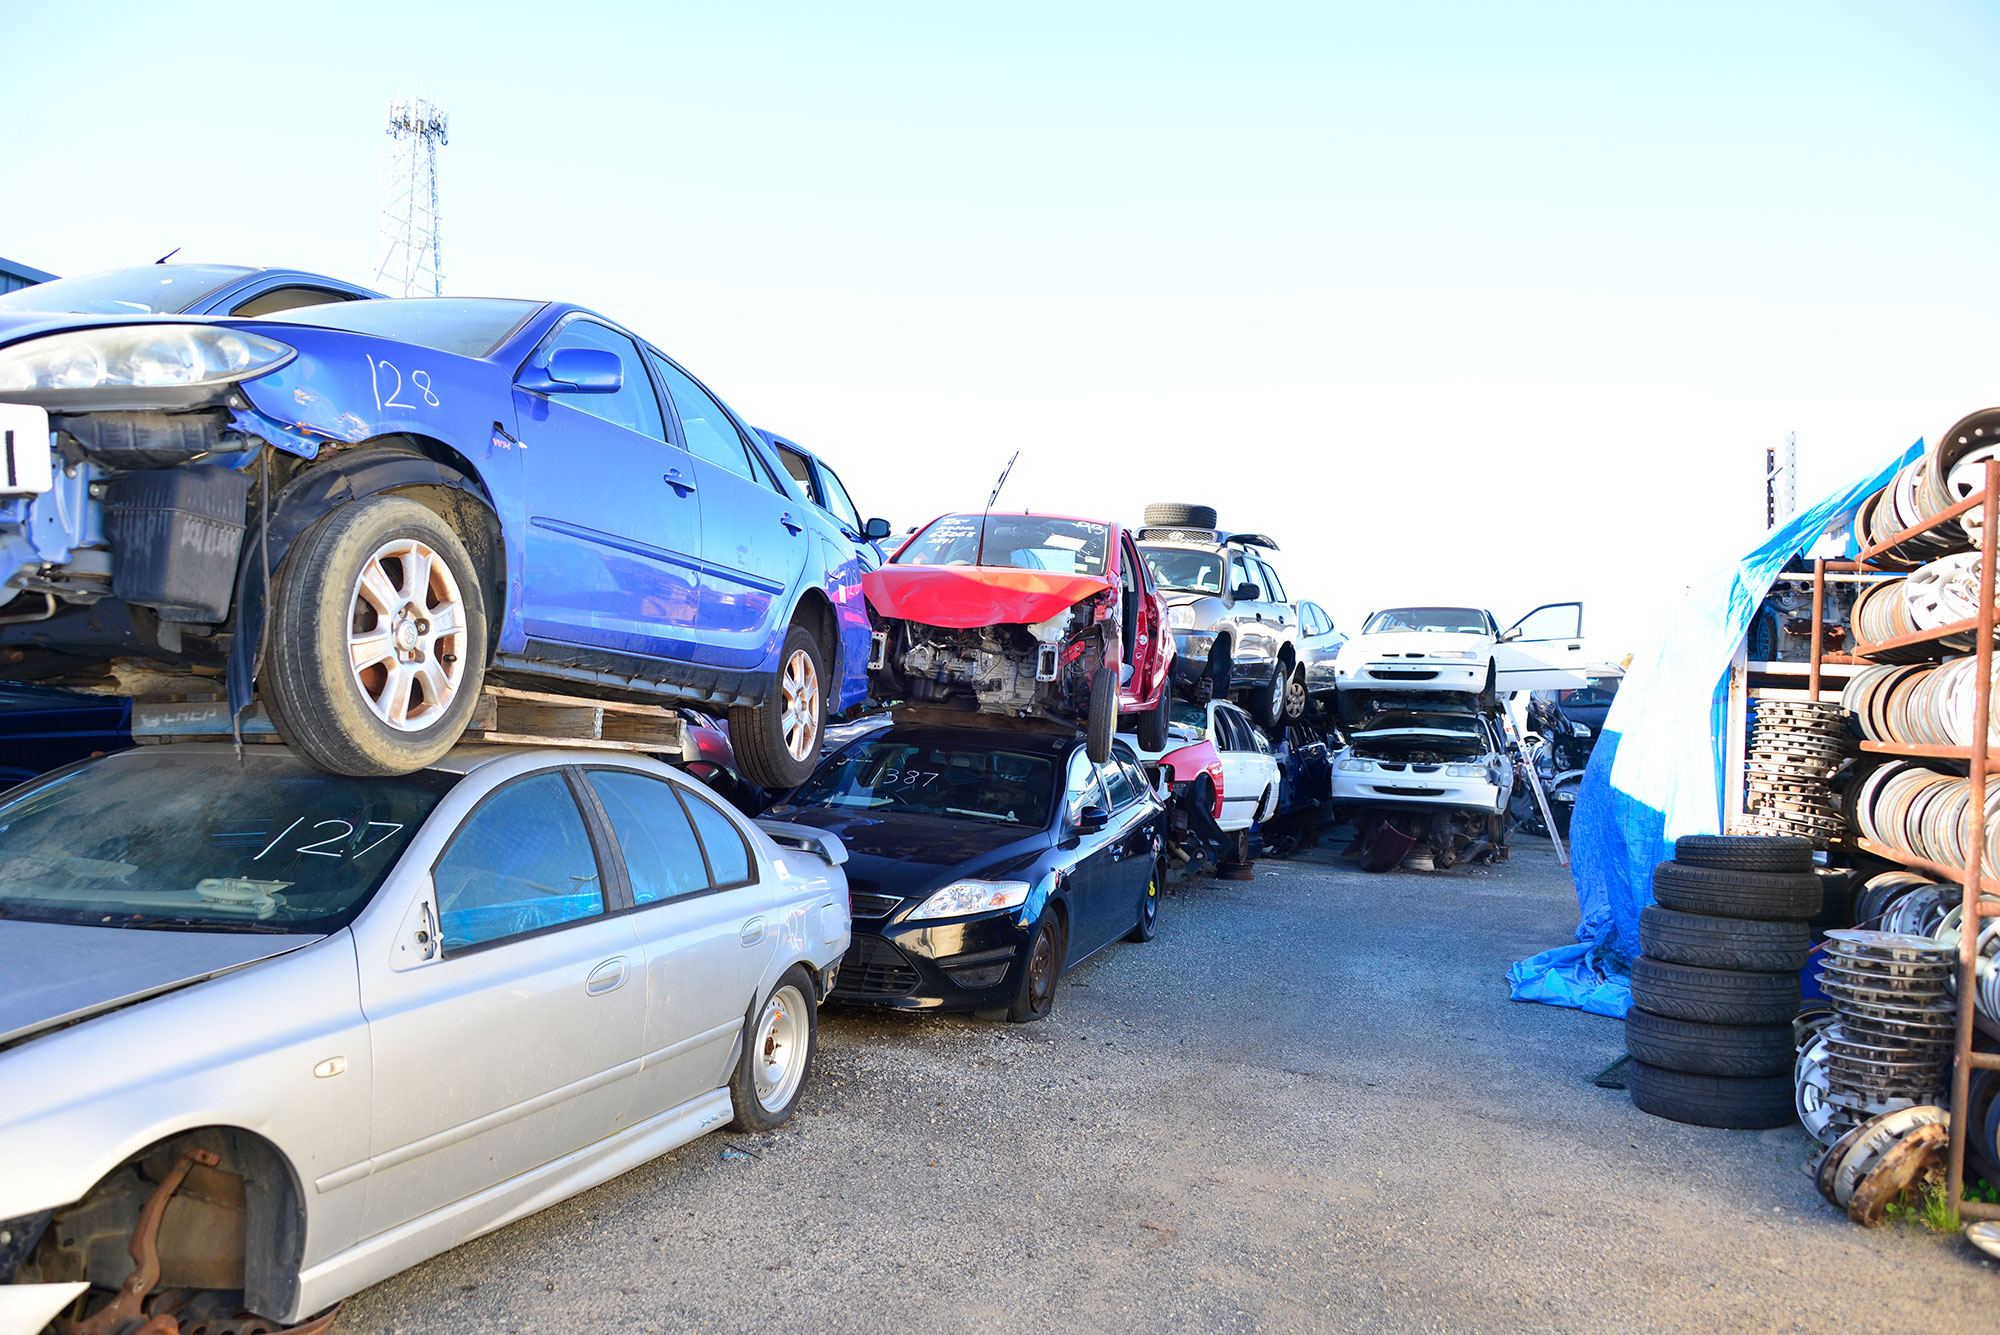 Auto Wreckers & Car Part Suppliers in Perth WA – A Master List